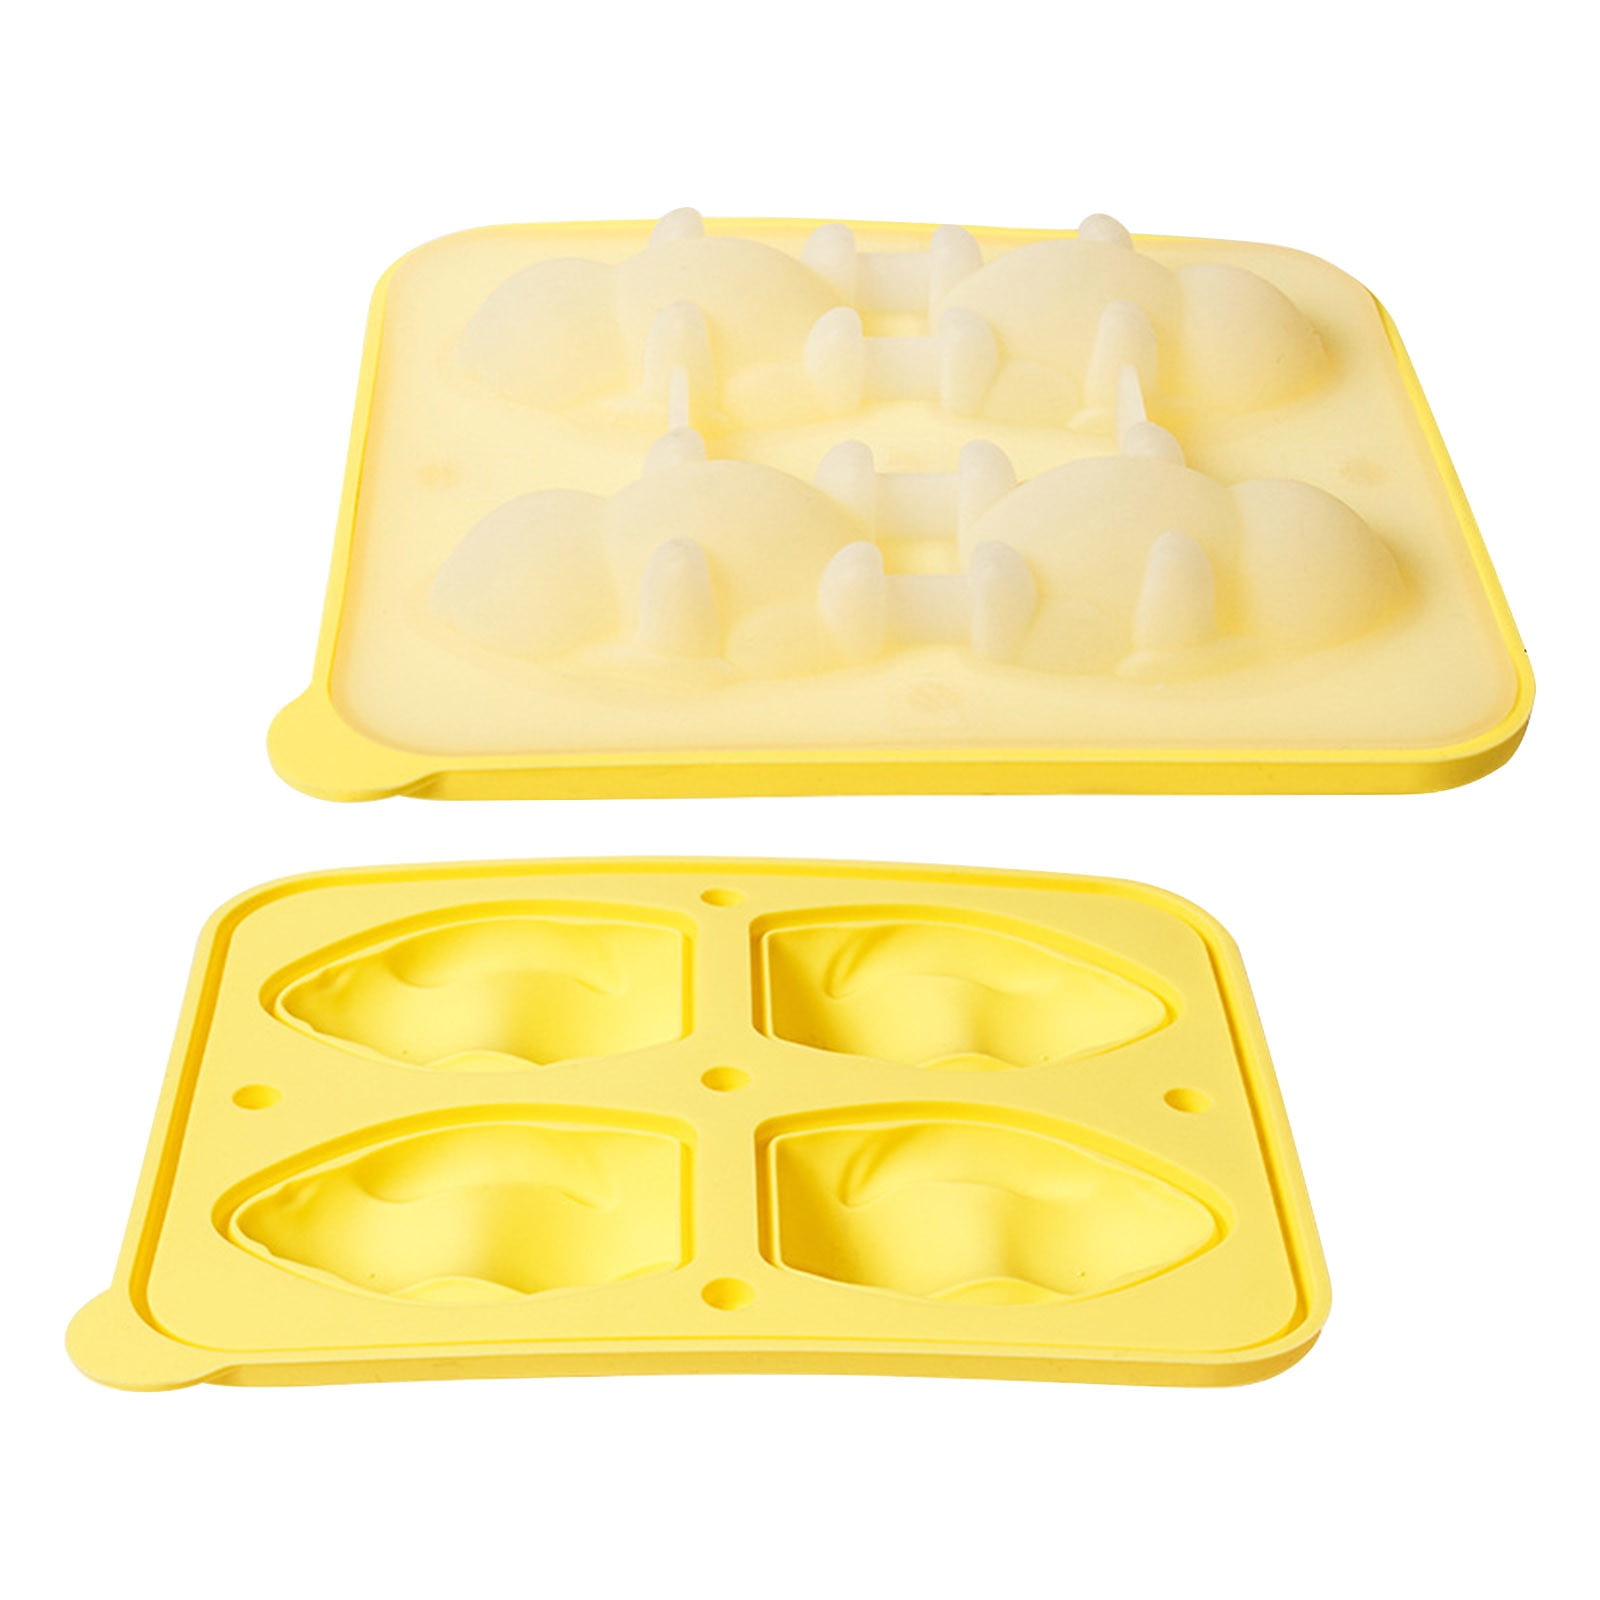  Yamteck Rabbit Ice Molds 2 Pack, Ice Cube Trays Mold to DIY  Lovely 3D Drink Ice Coffee Juice Cocktail. Easter Bunny Silicone Candle  Chocolate Mold for Easter Halloween Christmas Party Cake